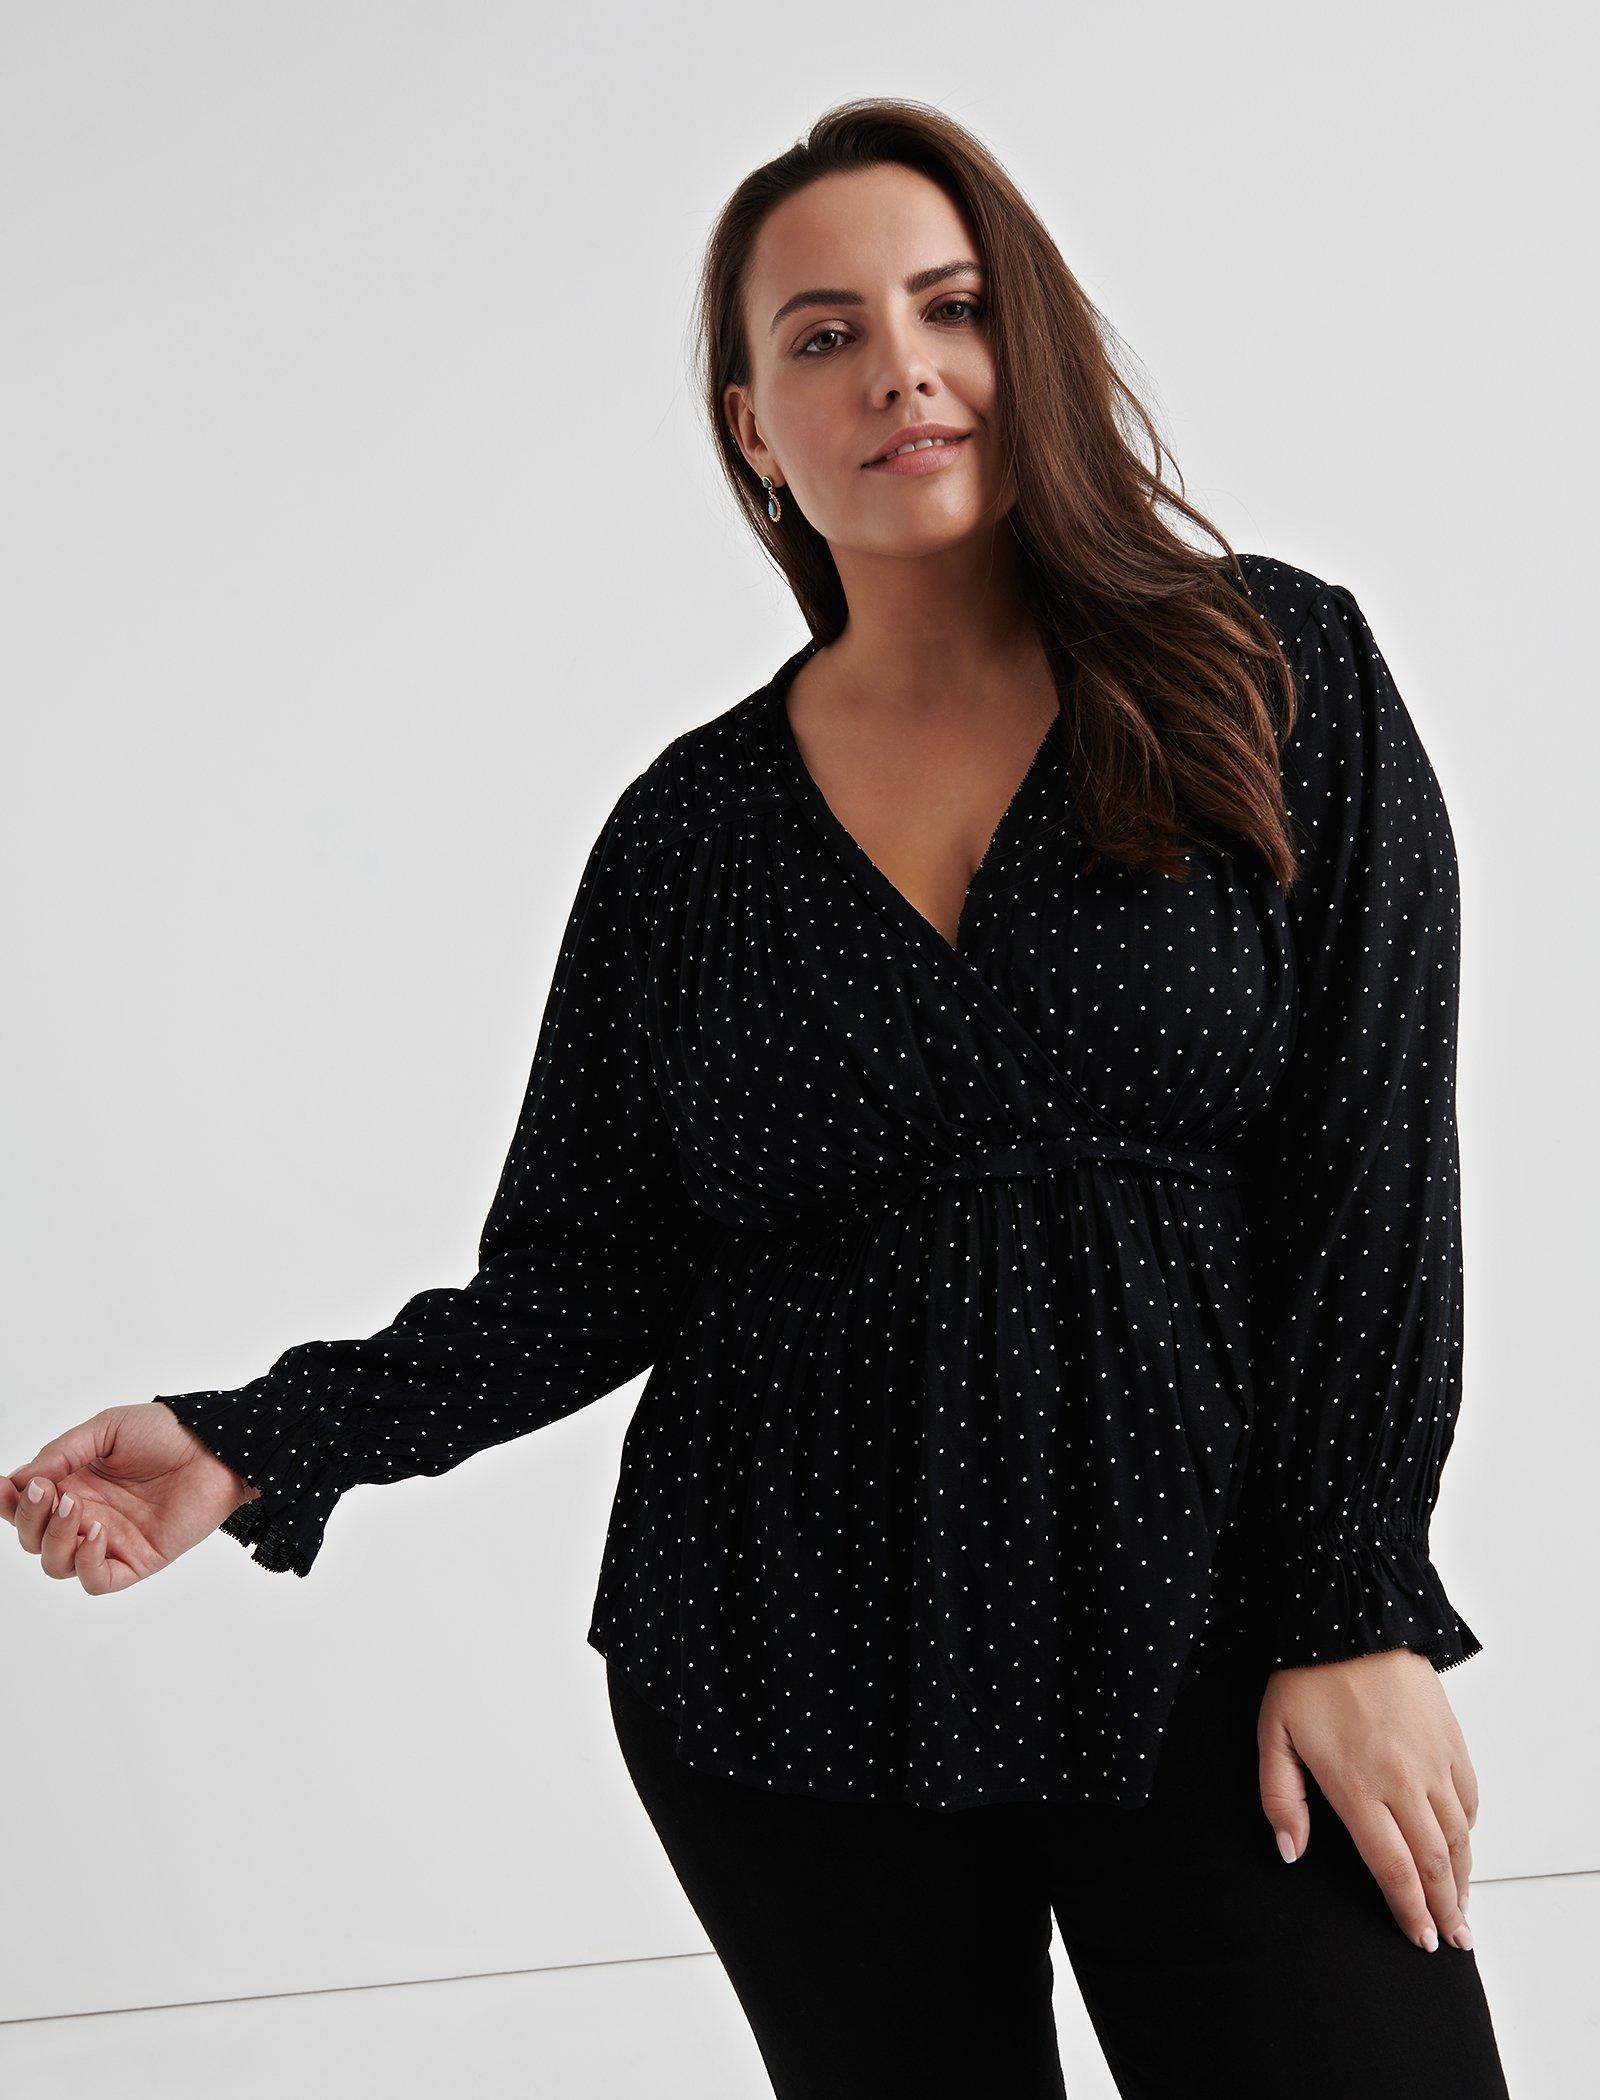 Plus Size Women's Clothing | Lucky Brand